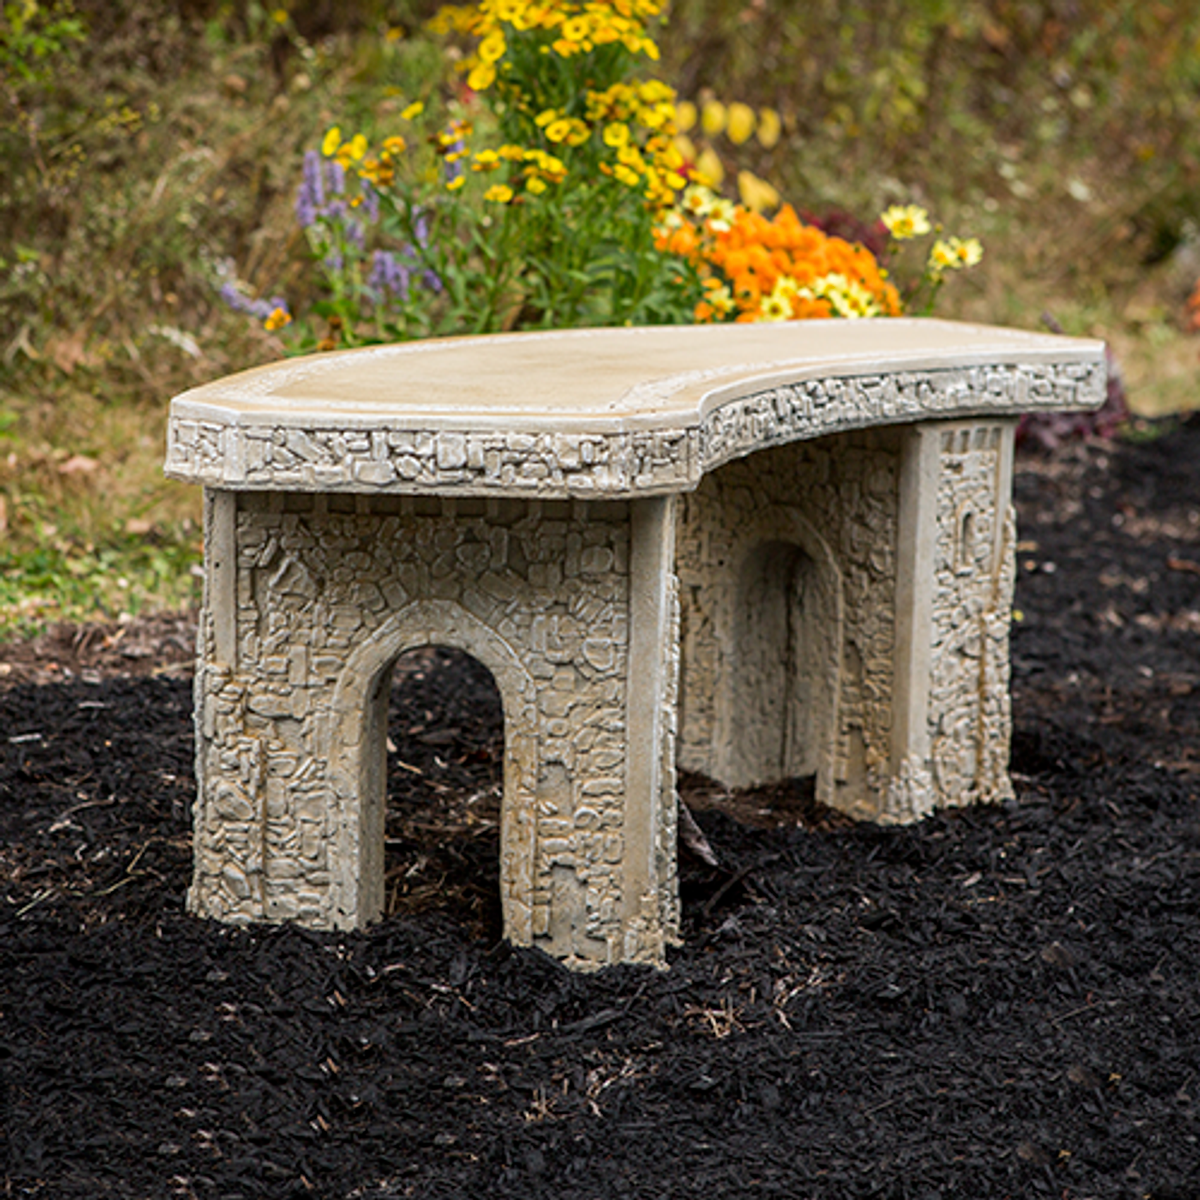 Hand sculpted large stone curved castle bench from Athena Garden make wonderful memorial and special holiday gifts. This curved cast stone bench is a unique castle design that has quality and personality , decorative concrete garden bench, outdoor decor and personalized memorial bench. 
Large Cast Stone Curve Bench, Athena Garden Romanesque style memorial bench, Tuscan stone garden bench,Outdoor Lawn and Garden Athena Garden Tuscan Decorative Bench, Large Cast stone Bench, Curved Garden Bench 